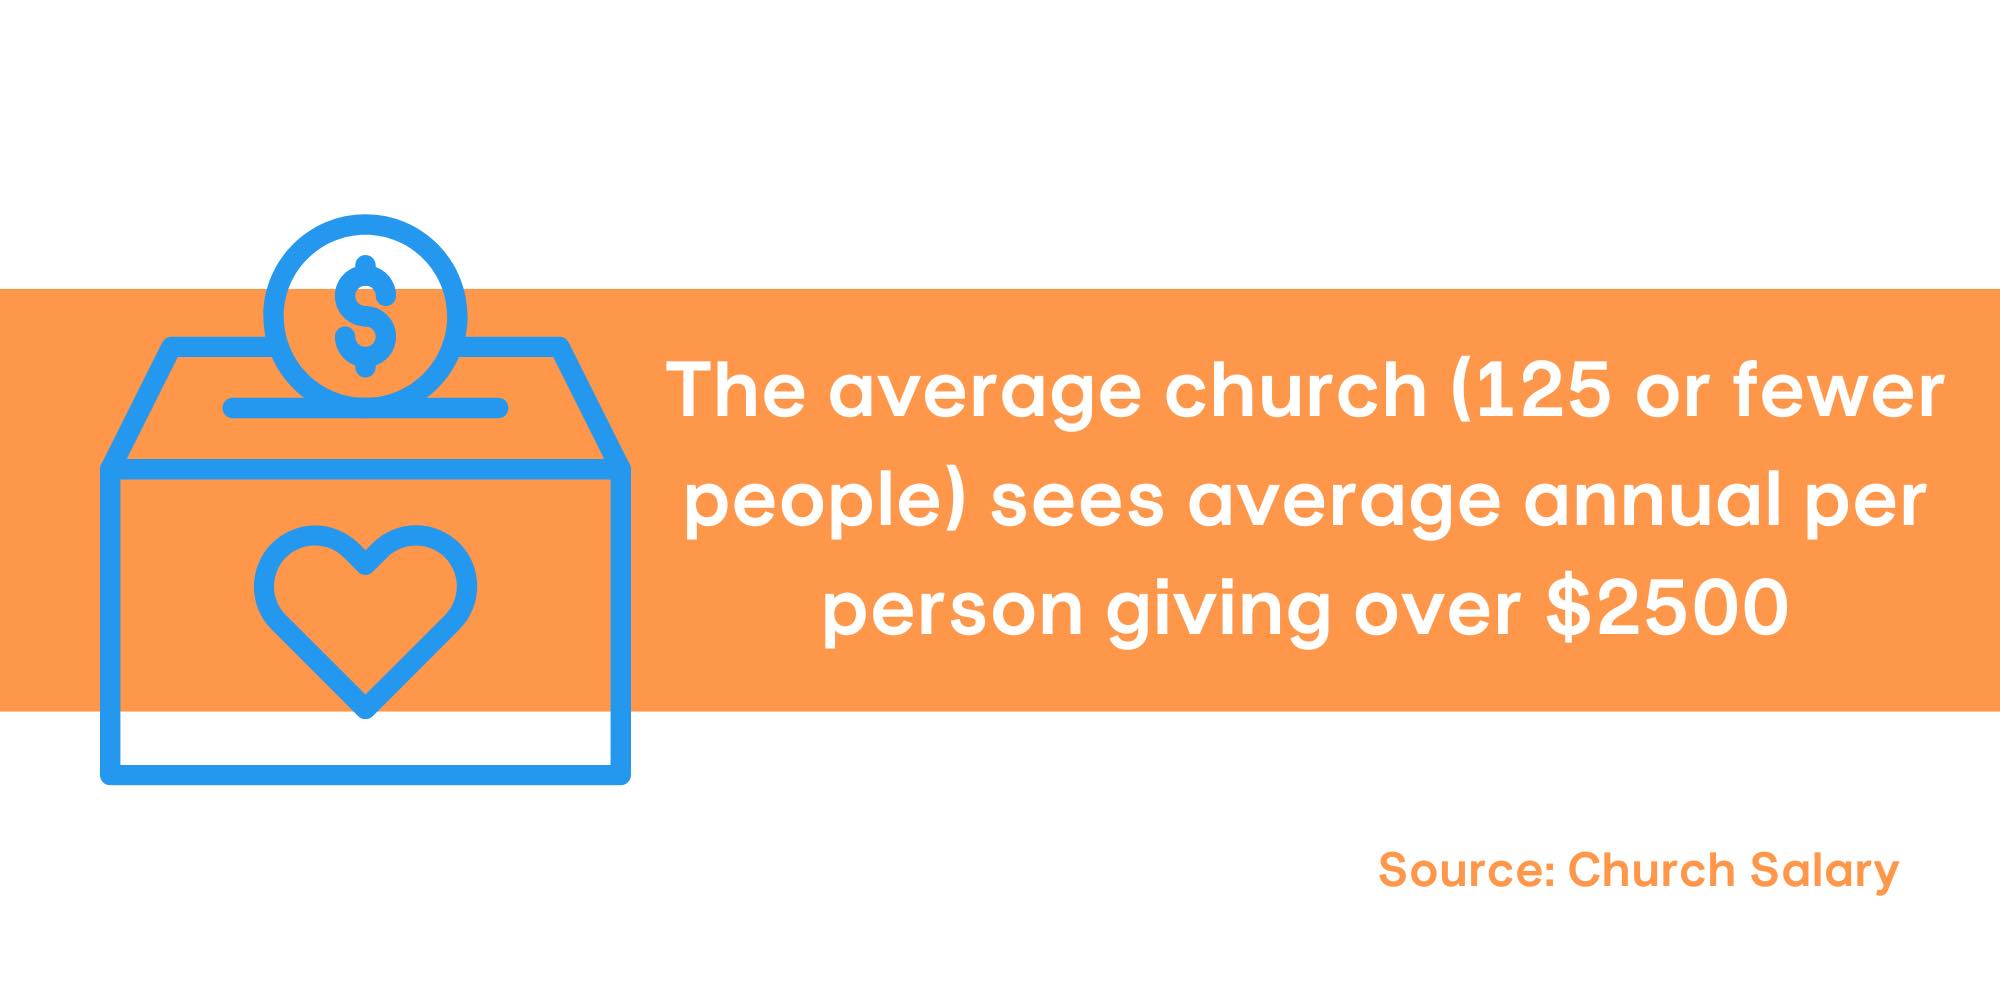 Churches with 125 people saw over $2500 as average per person giving